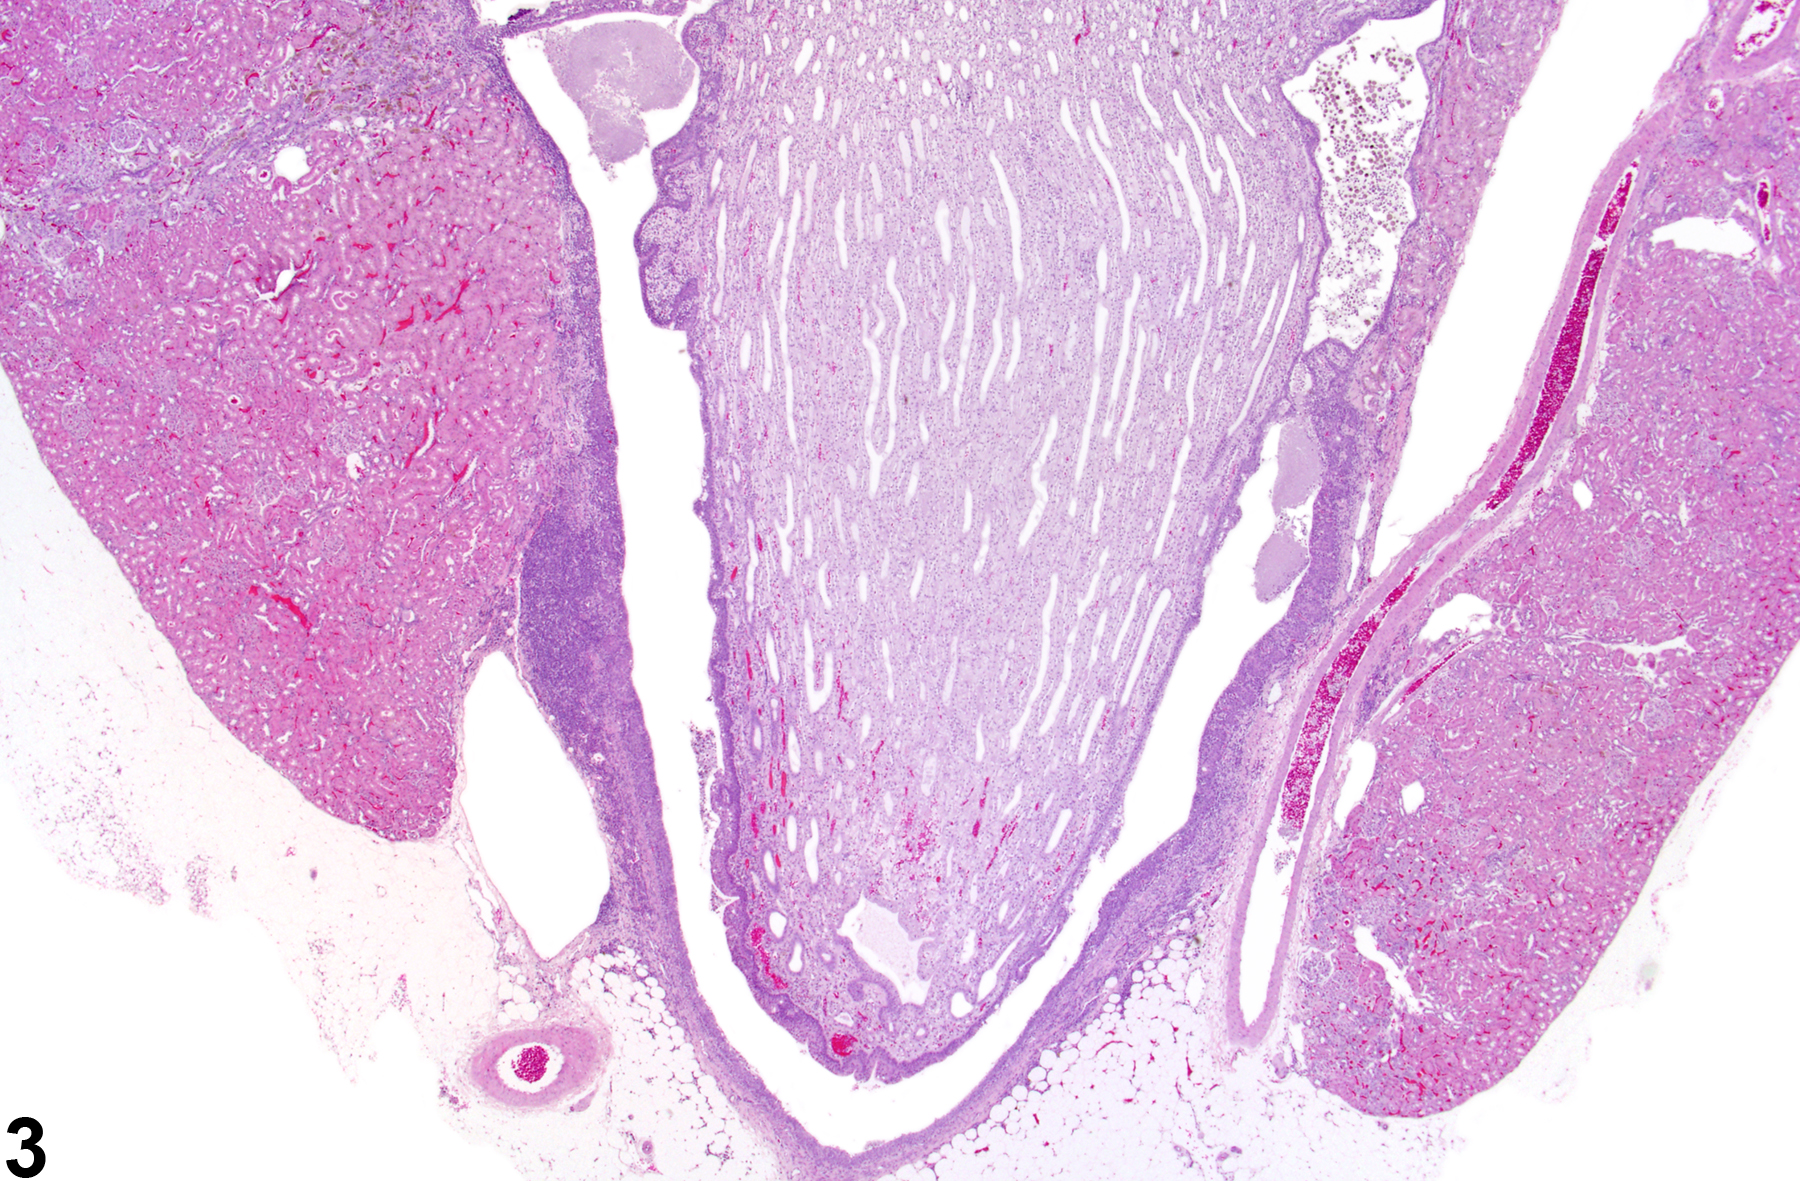 Image of inflammation, chronic in the kidney from a female F344/N rat in a chronic study